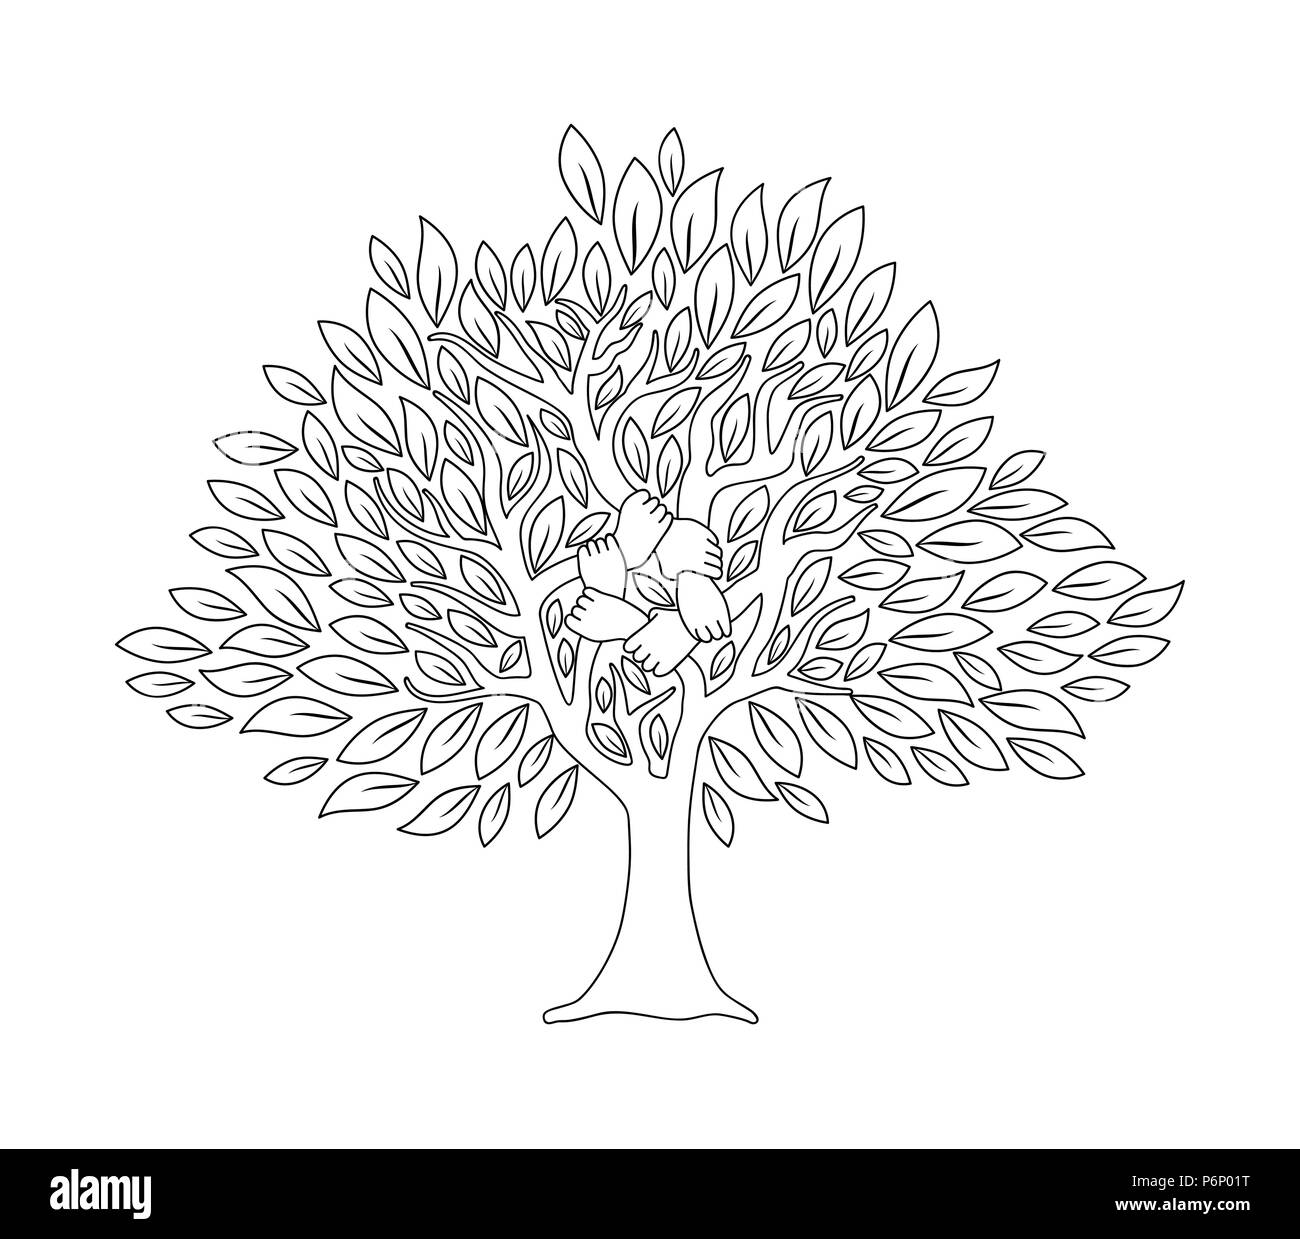 No Skill Required for a Meditative Experience 'Drawing Trees' - GeekMom